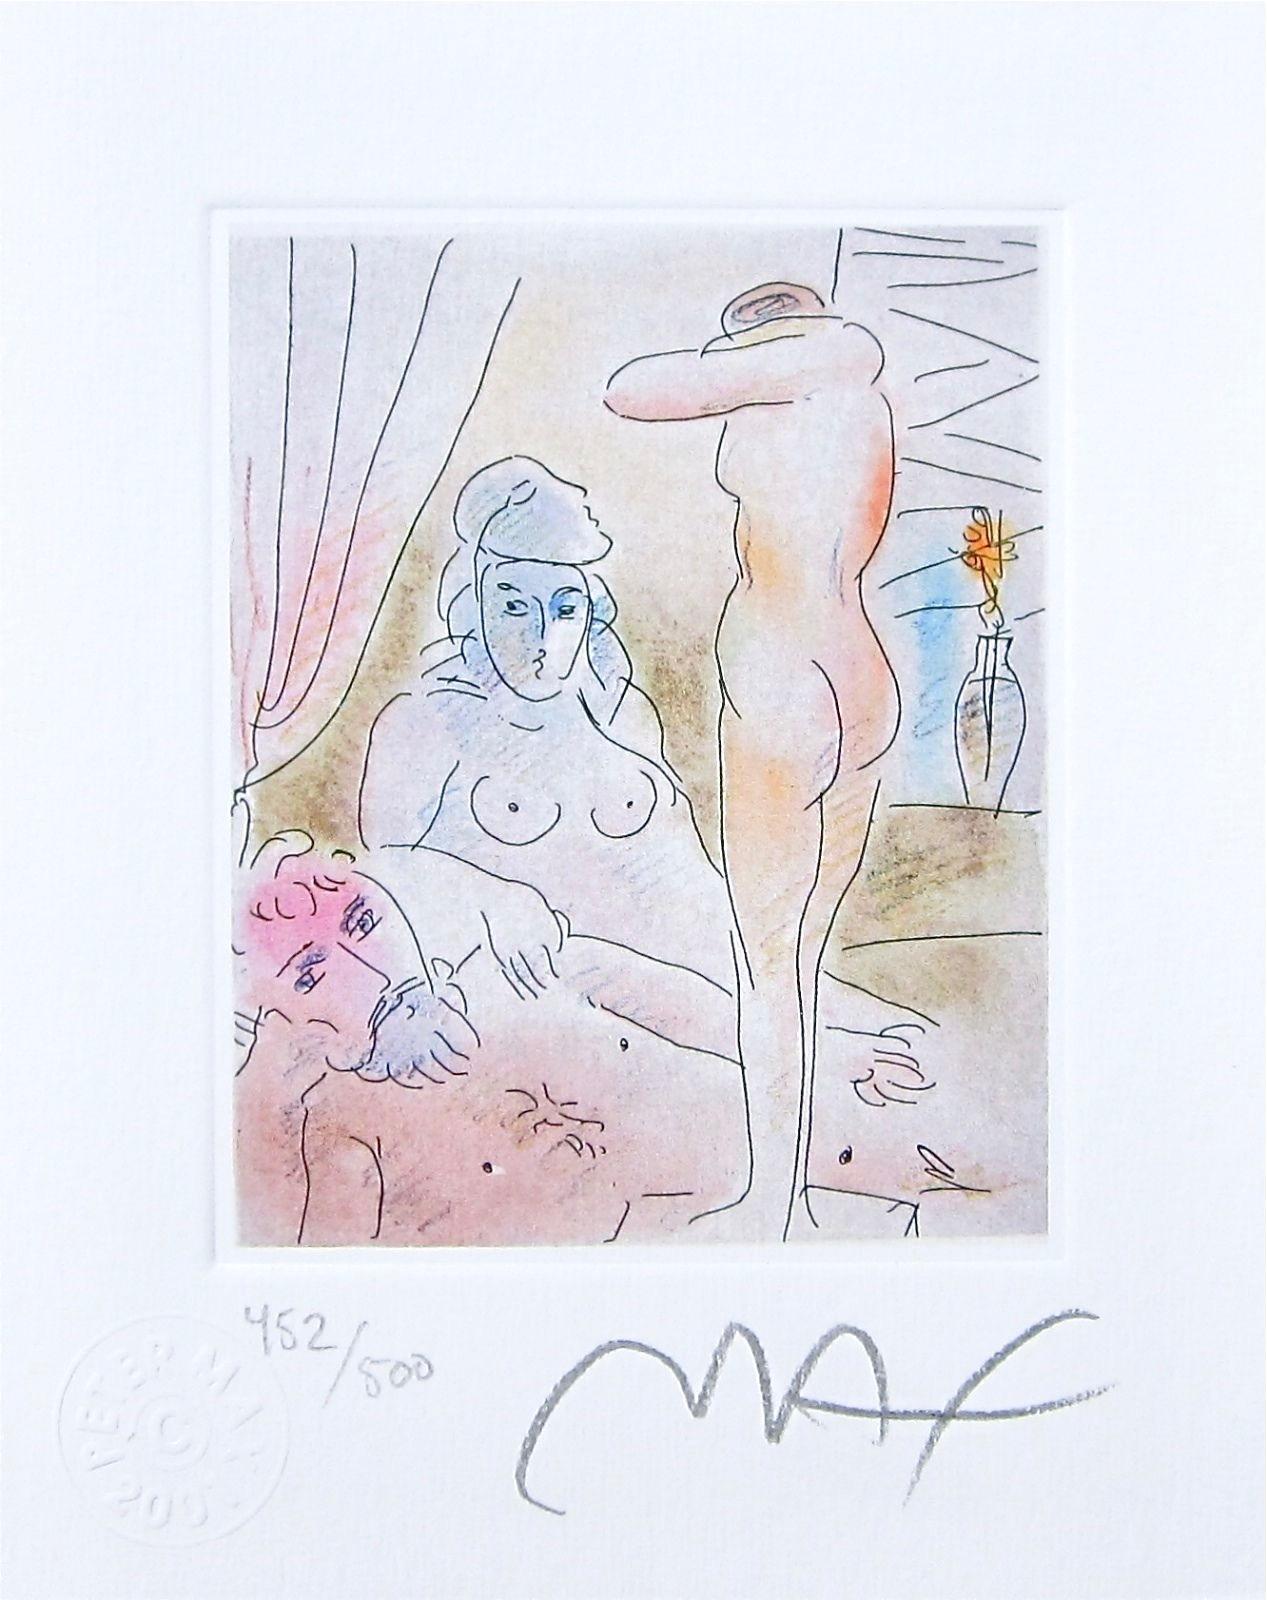 Artist: Peter Max (1937)
Title: Homage to Picasso, Volume I, #3
Year: 2001
Edition: 452/500, plus proofs
Medium: Lithograph on Lustro Saxony paper
Size: 4 x 5 inches
Condition: Excellent
Inscription: Signed and numbered by the artist.
Notes: